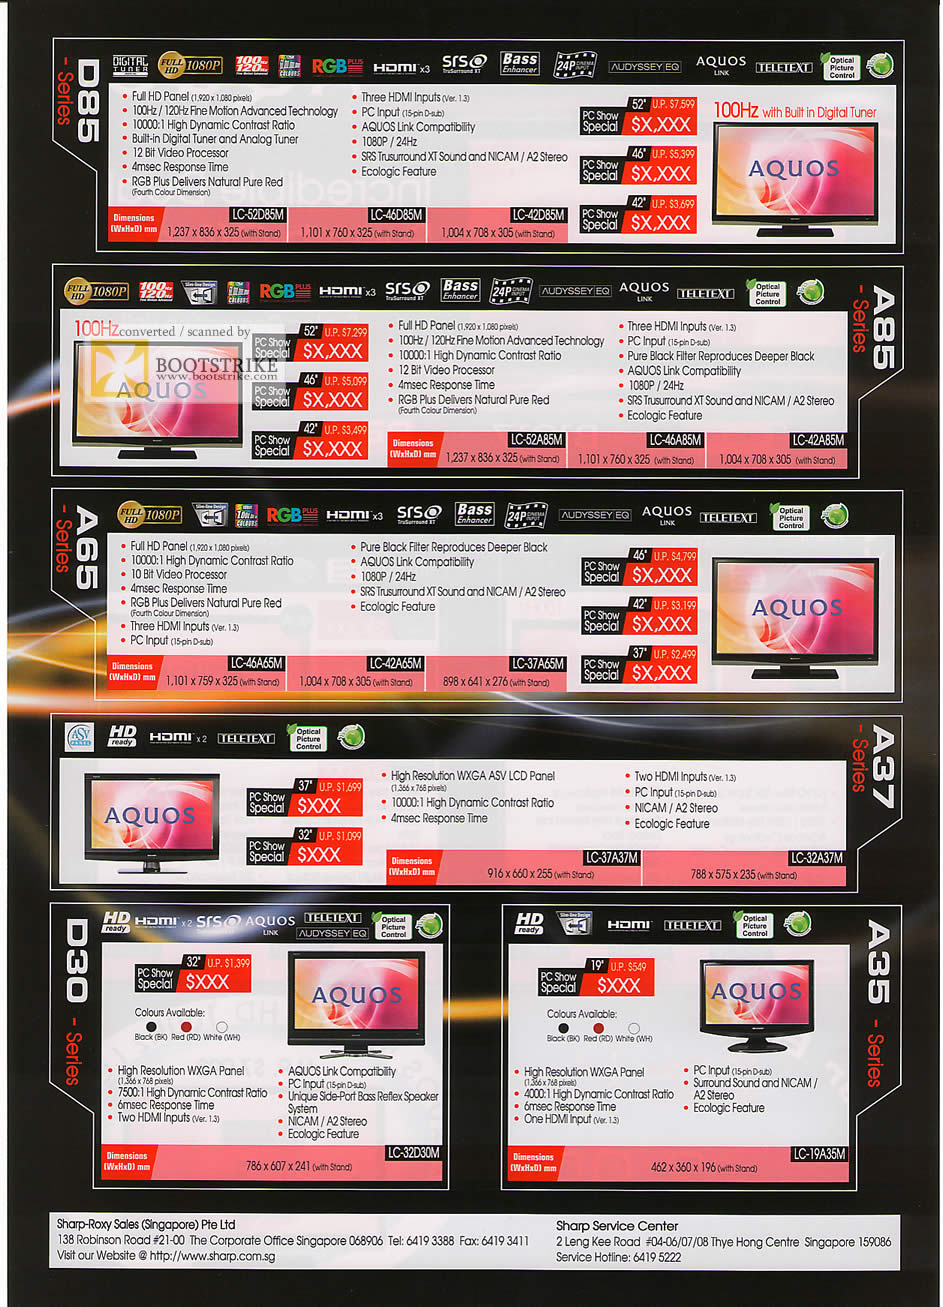 PC Show 2009 price list image brochure of Sharp Aquos LCD TVs D85 A85 A65 A37 A35 D30